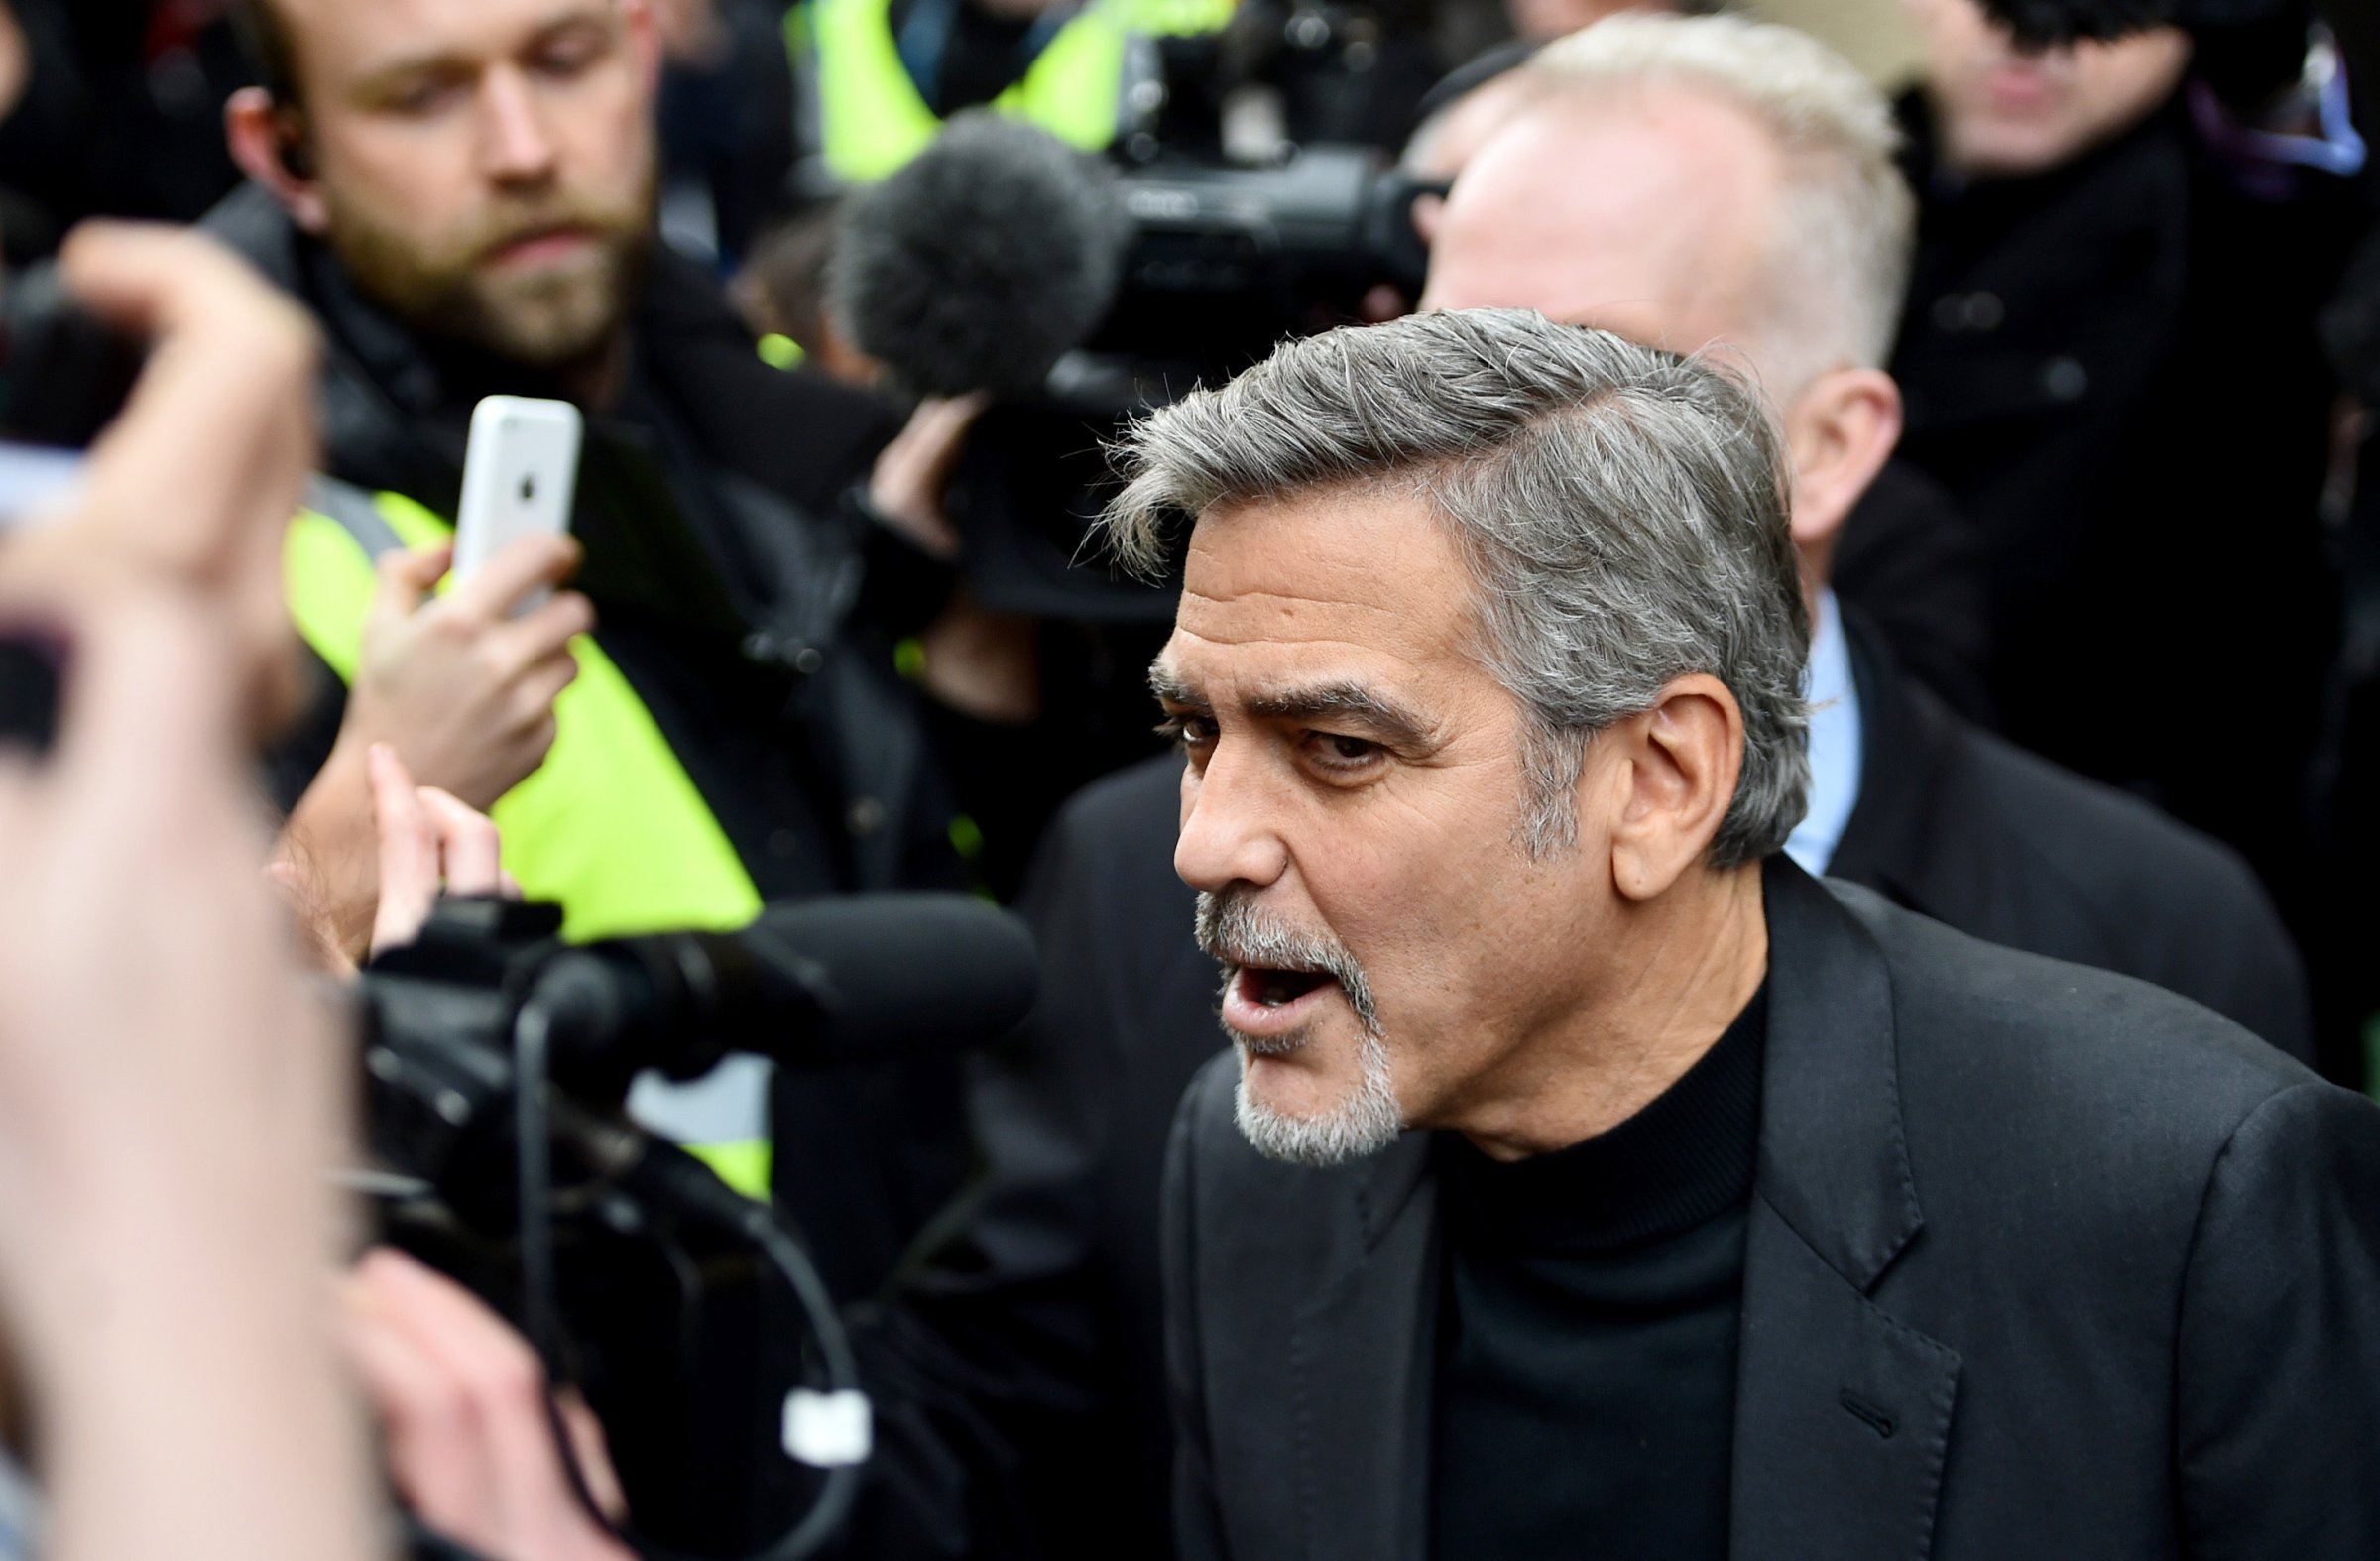 Hollywood actor George Clooney, meets members of the public during a visit to Social Bite sandwich shop which helps homeless people on November 12, 2015 in Edinburgh,Scotland.